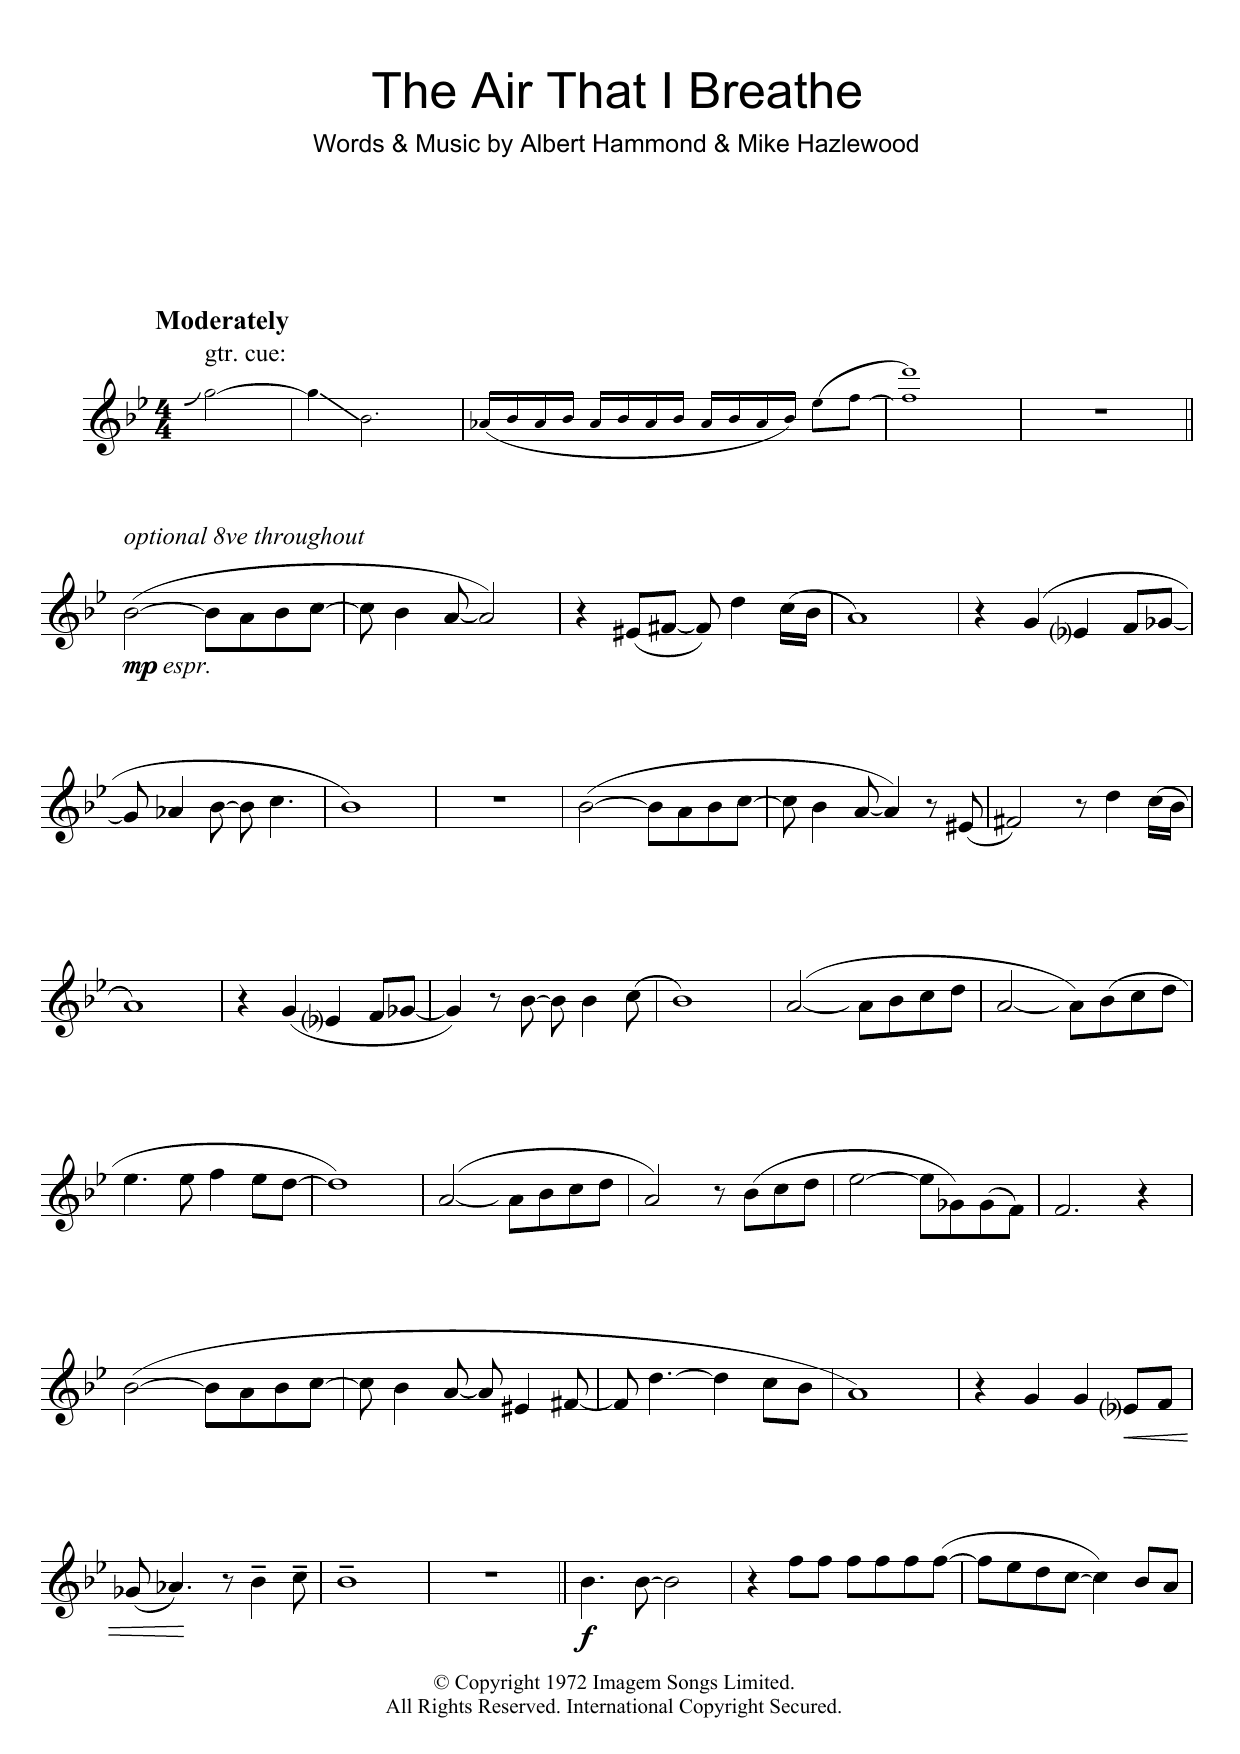 Download The Hollies The Air That I Breathe Sheet Music